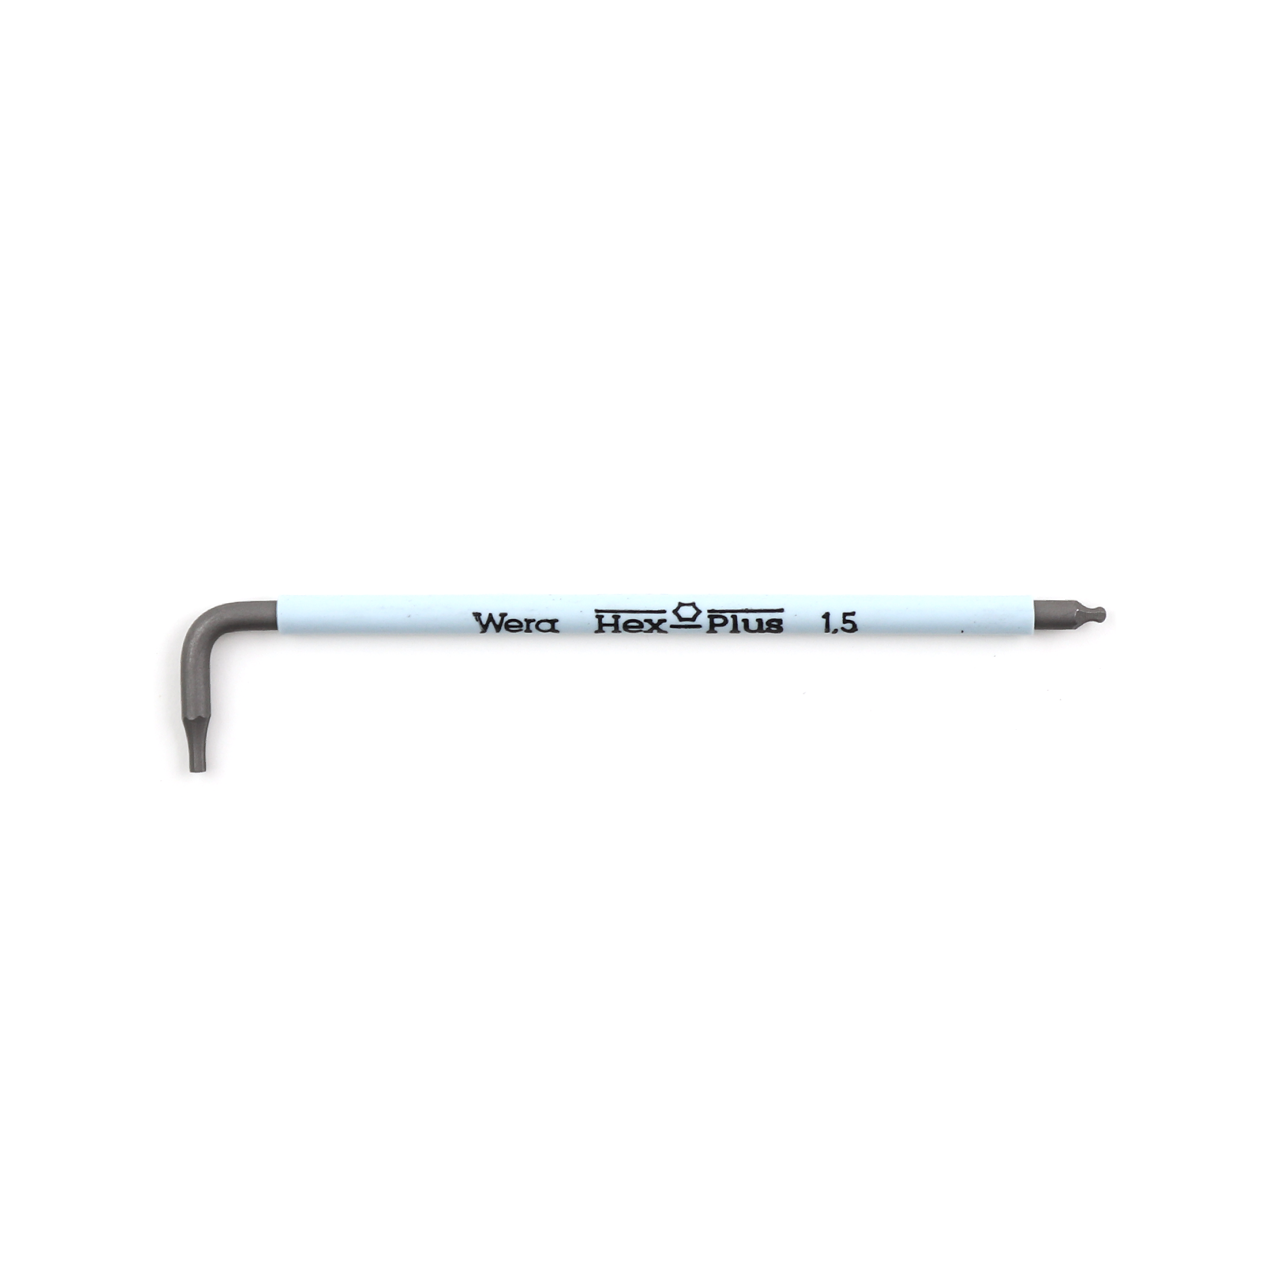 1.5 mm Allen Wrench for Set Screw M3